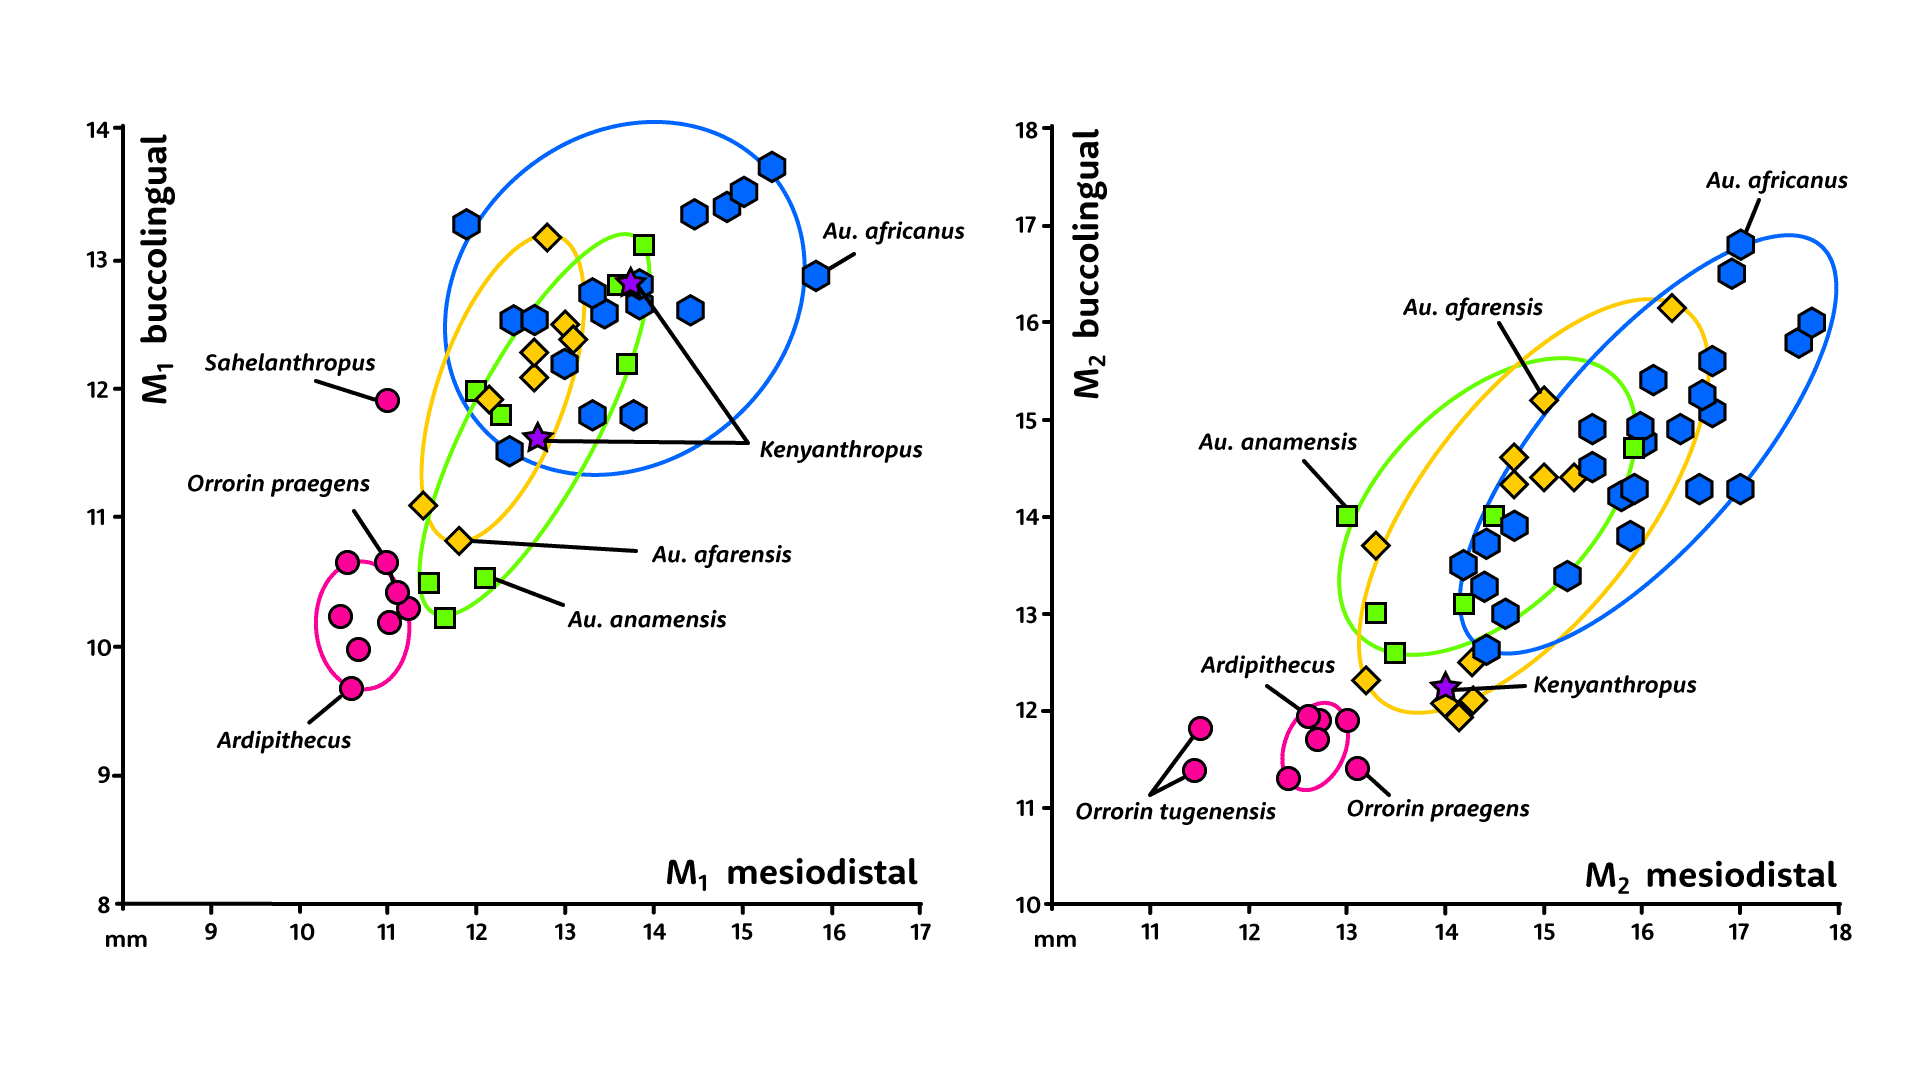 Two charts. Left shows M1 dimensions, right shows M2 dimensions for many species of early hominins